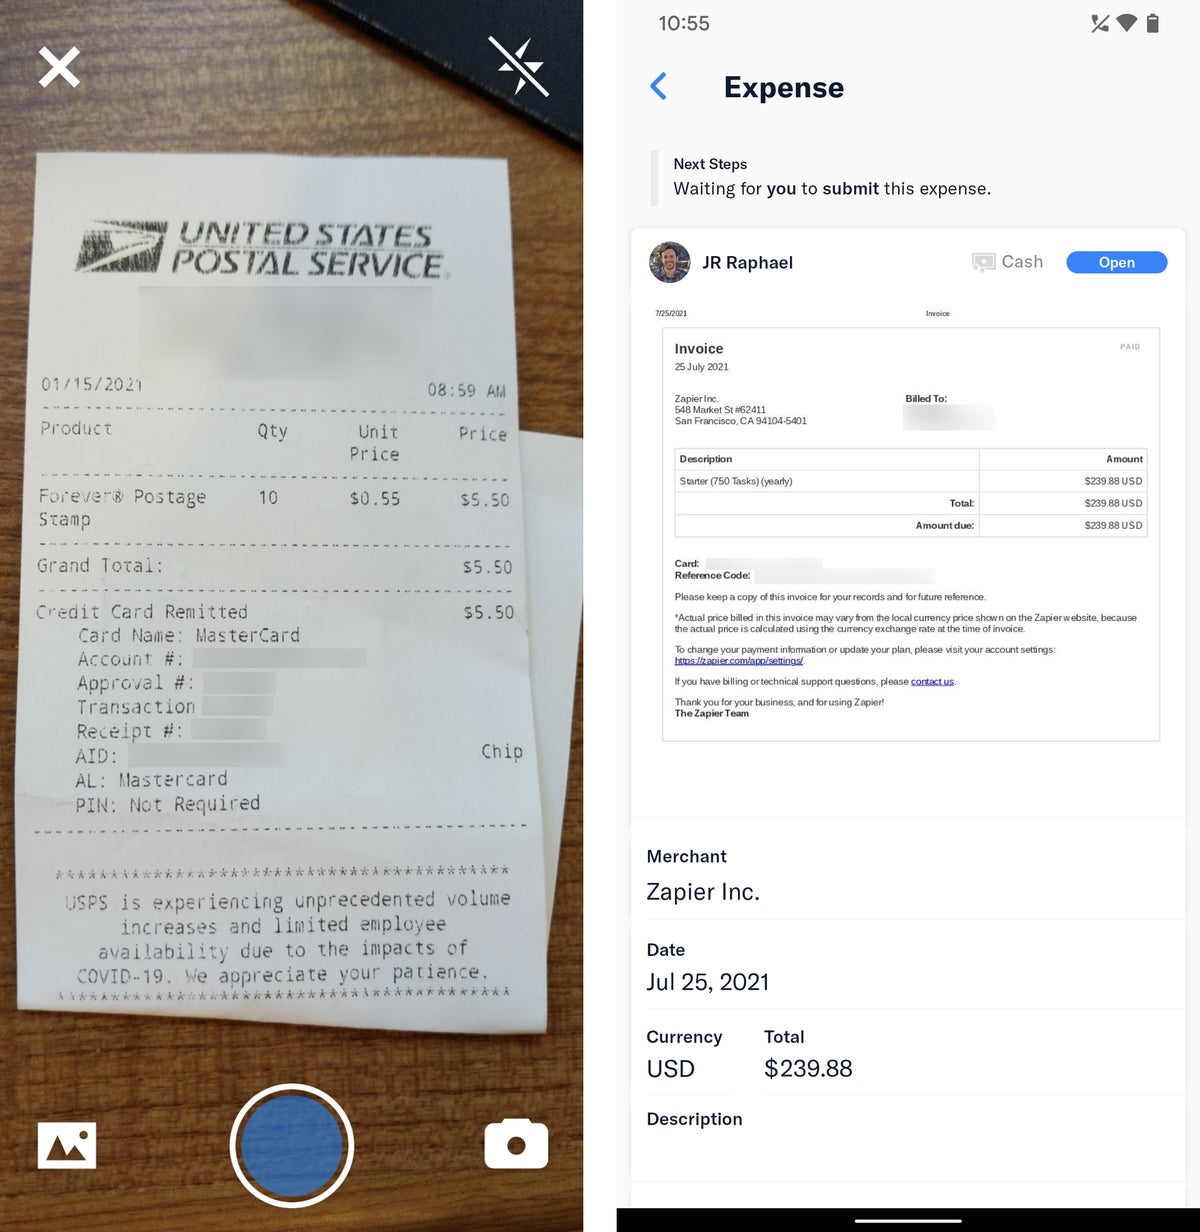 android travel apps expensify 2021